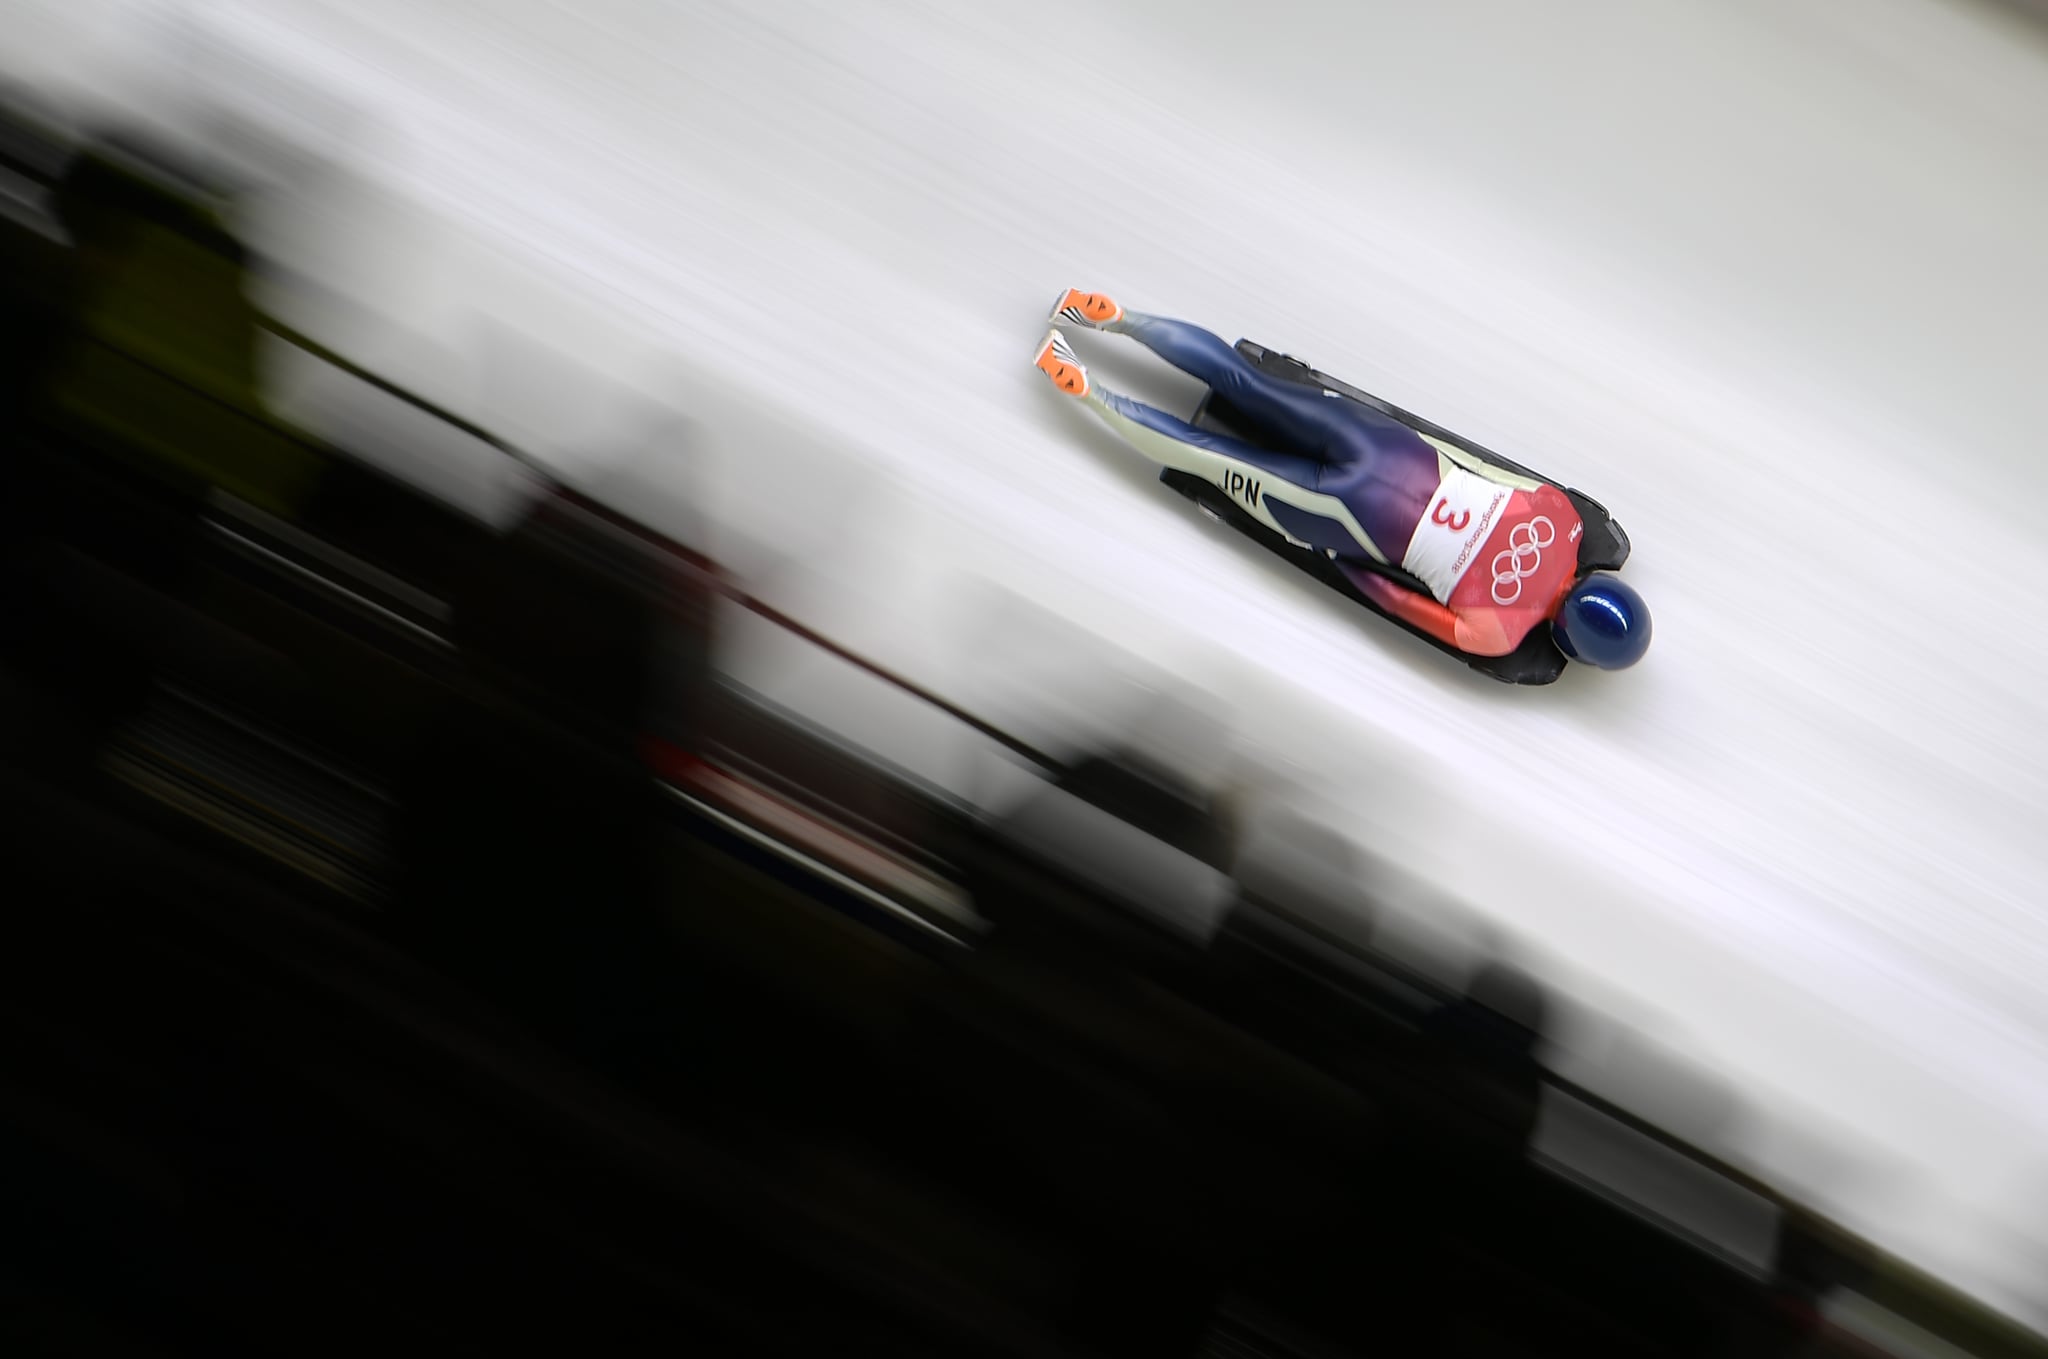 Japan's Takako Oguchi competes in the women's skeleton heat 3 run during the Pyeongchang 2018 Winter Olympic Games, at the Olympic Sliding Centre on February 17, 2018 in Pyeongchang.  / AFP PHOTO / MOHD RASFAN        (Photo credit should read MOHD RASFAN/AFP via Getty Images)